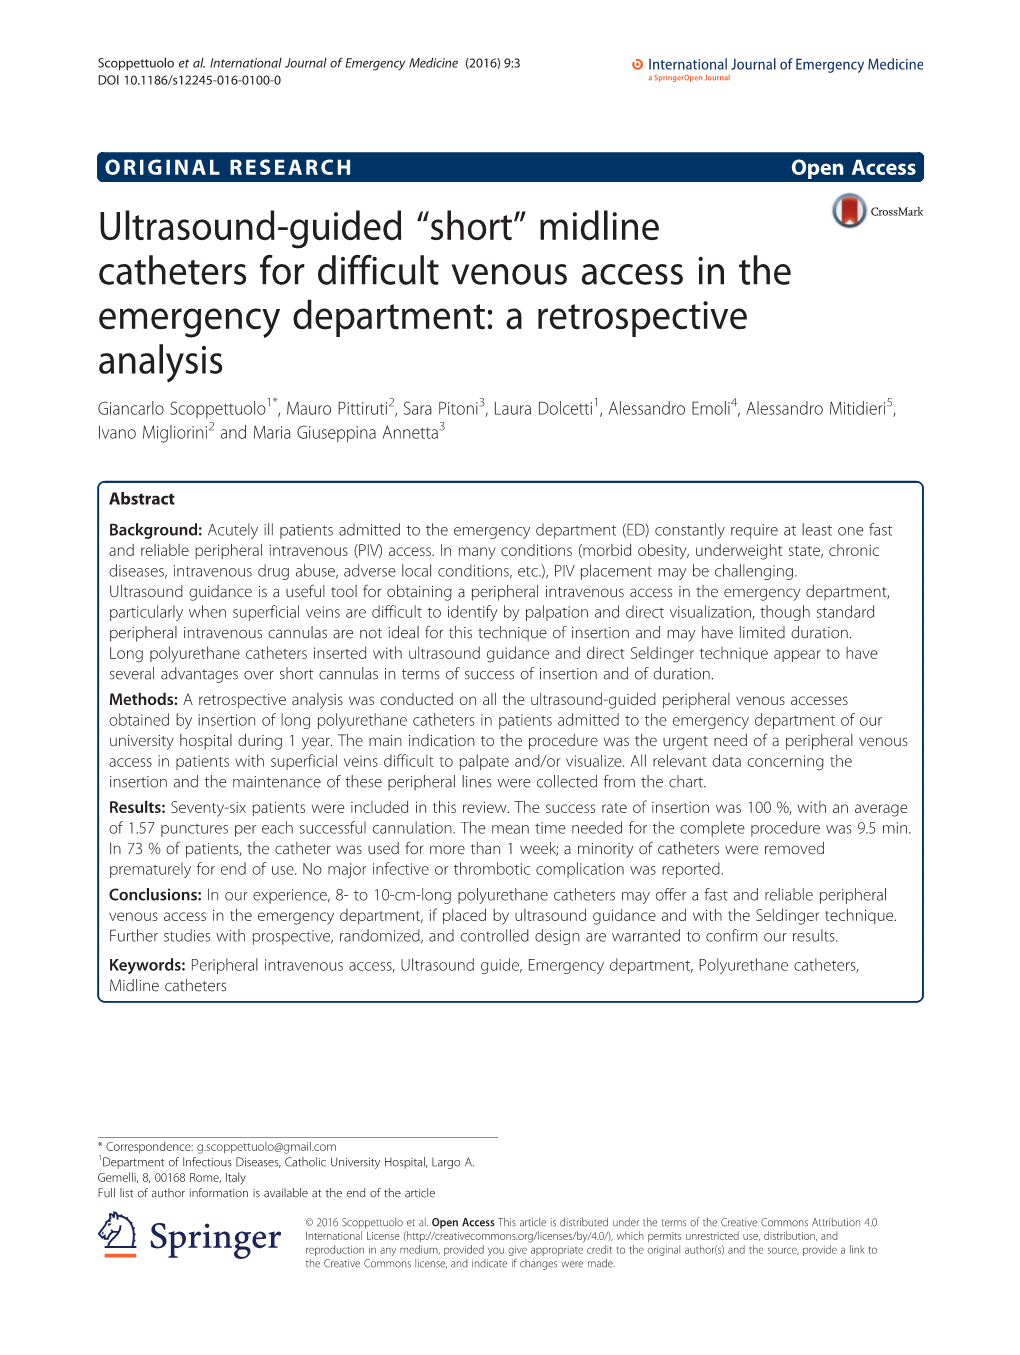 Ultrasound-Guided “Short” Midline Catheters for Difficult Venous Access